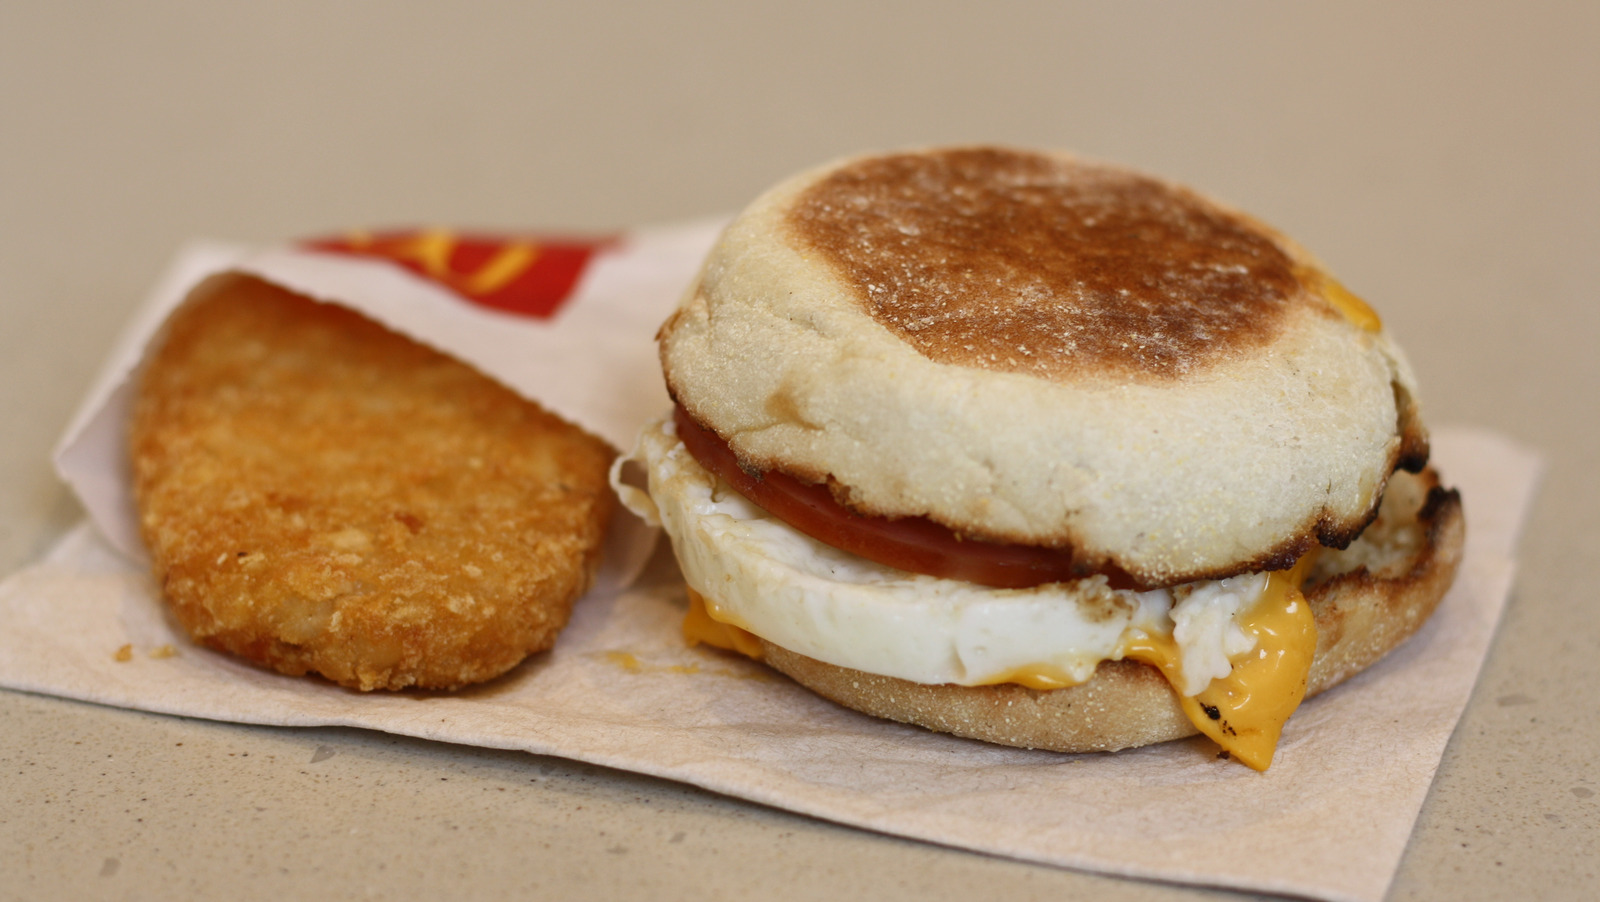 https://www.tastingtable.com/img/gallery/how-to-replicate-the-egg-from-a-mcmuffin-without-a-mold/l-intro-1661369353.jpg